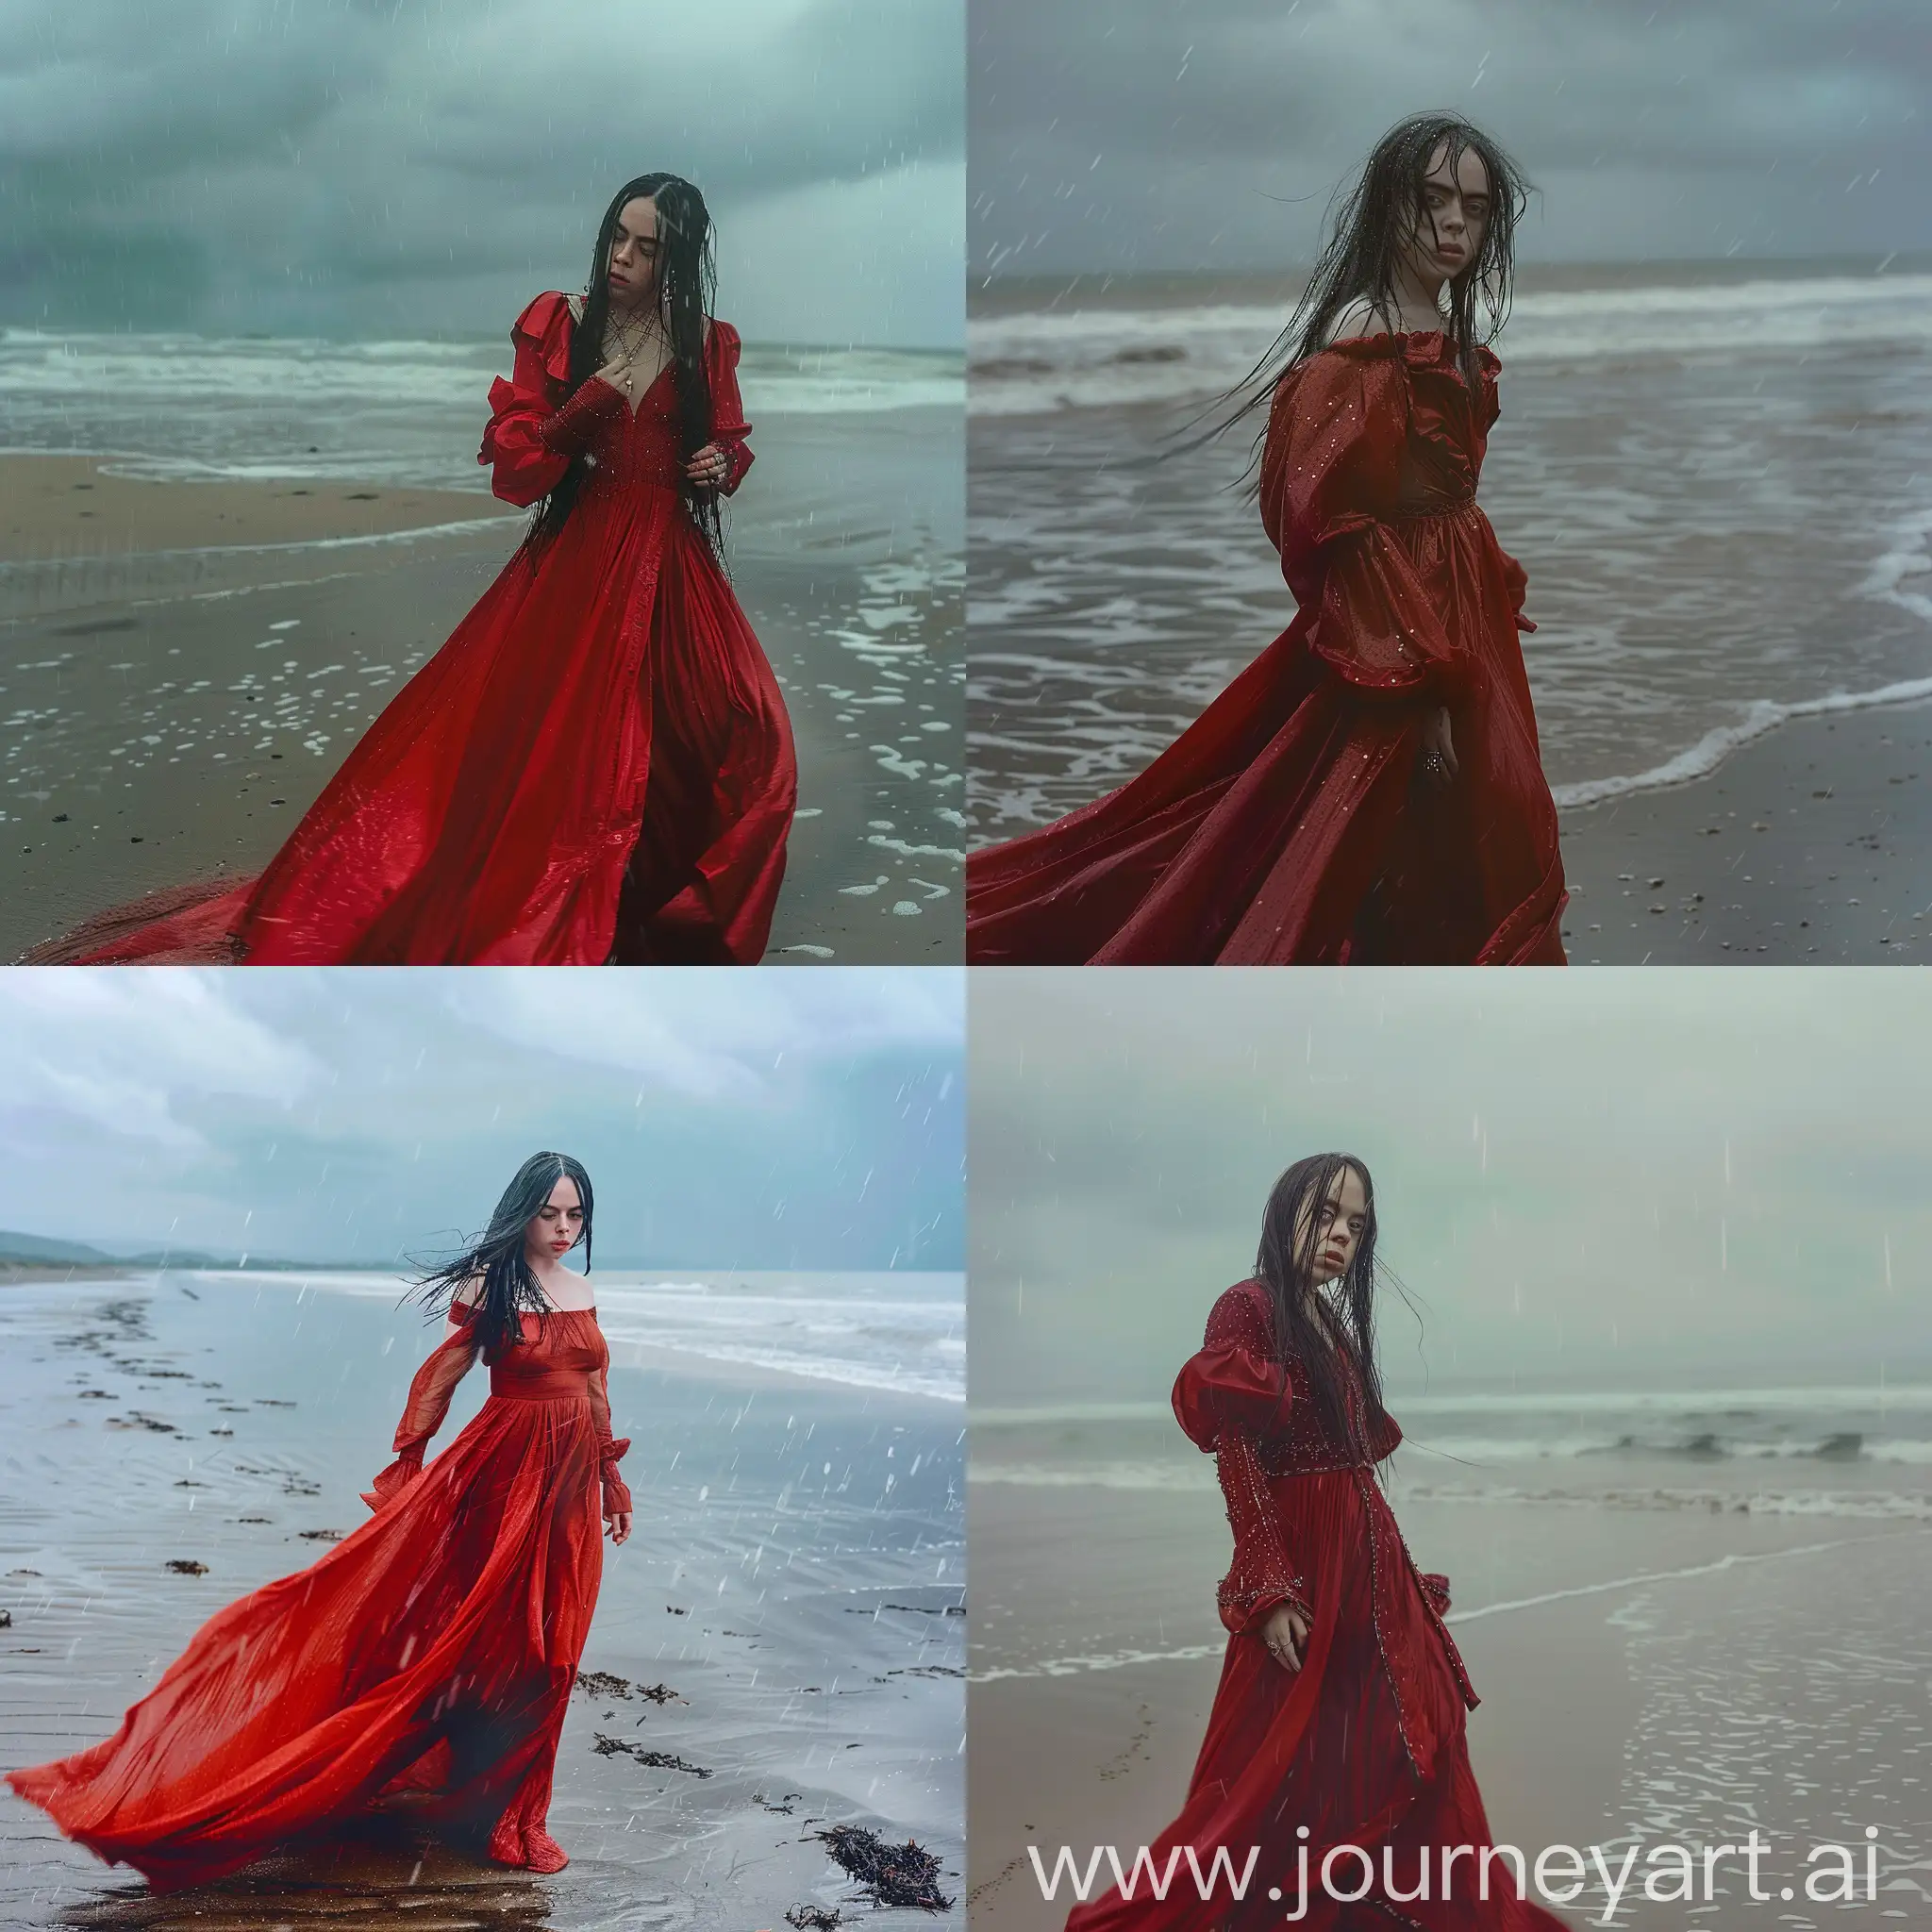 Billie Eilish in a long red dress on the beach while it is raining